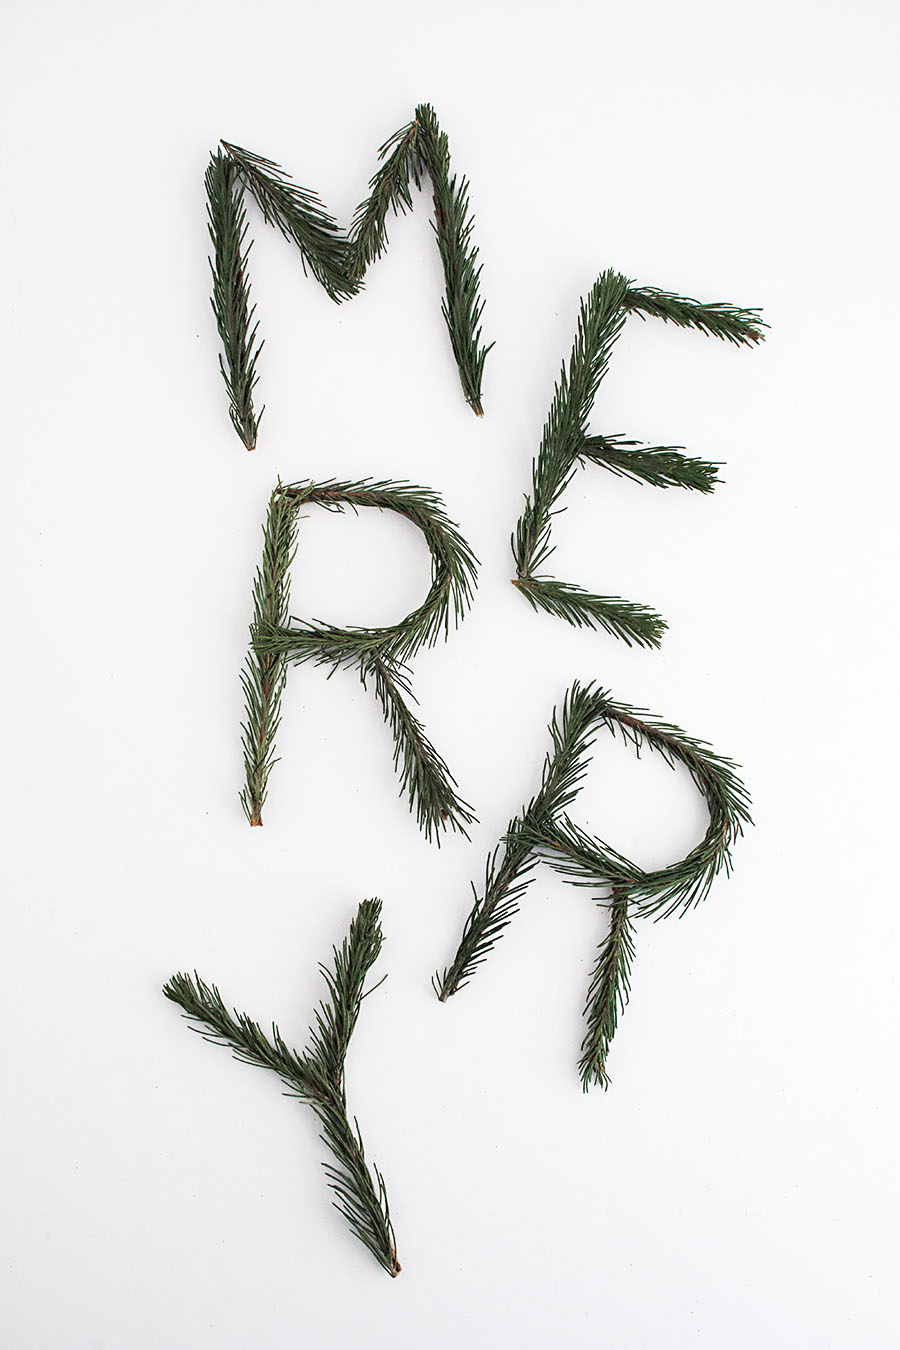 Merry pine letters